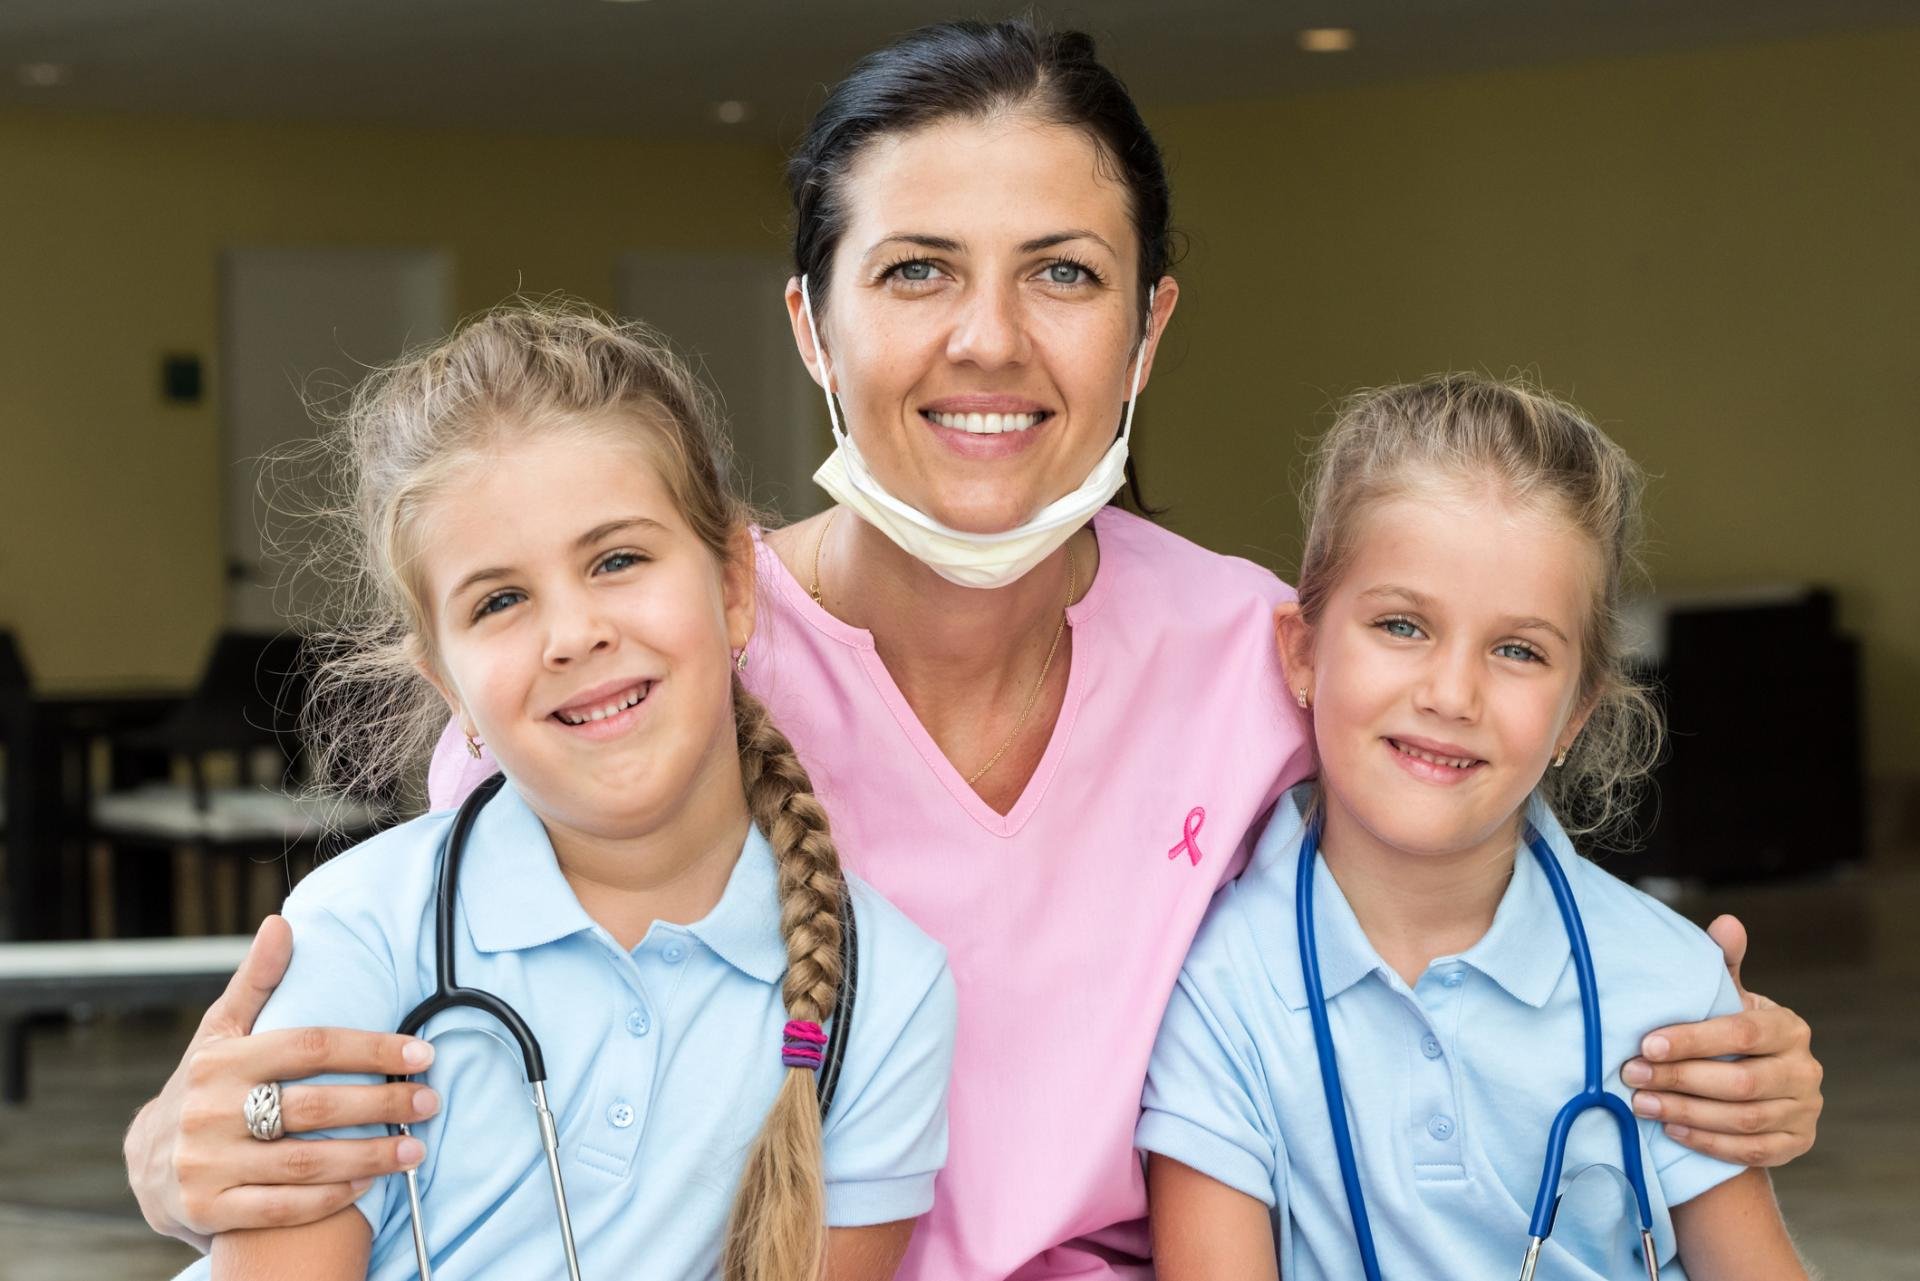 Posing with her patients | ProLink School Staffing